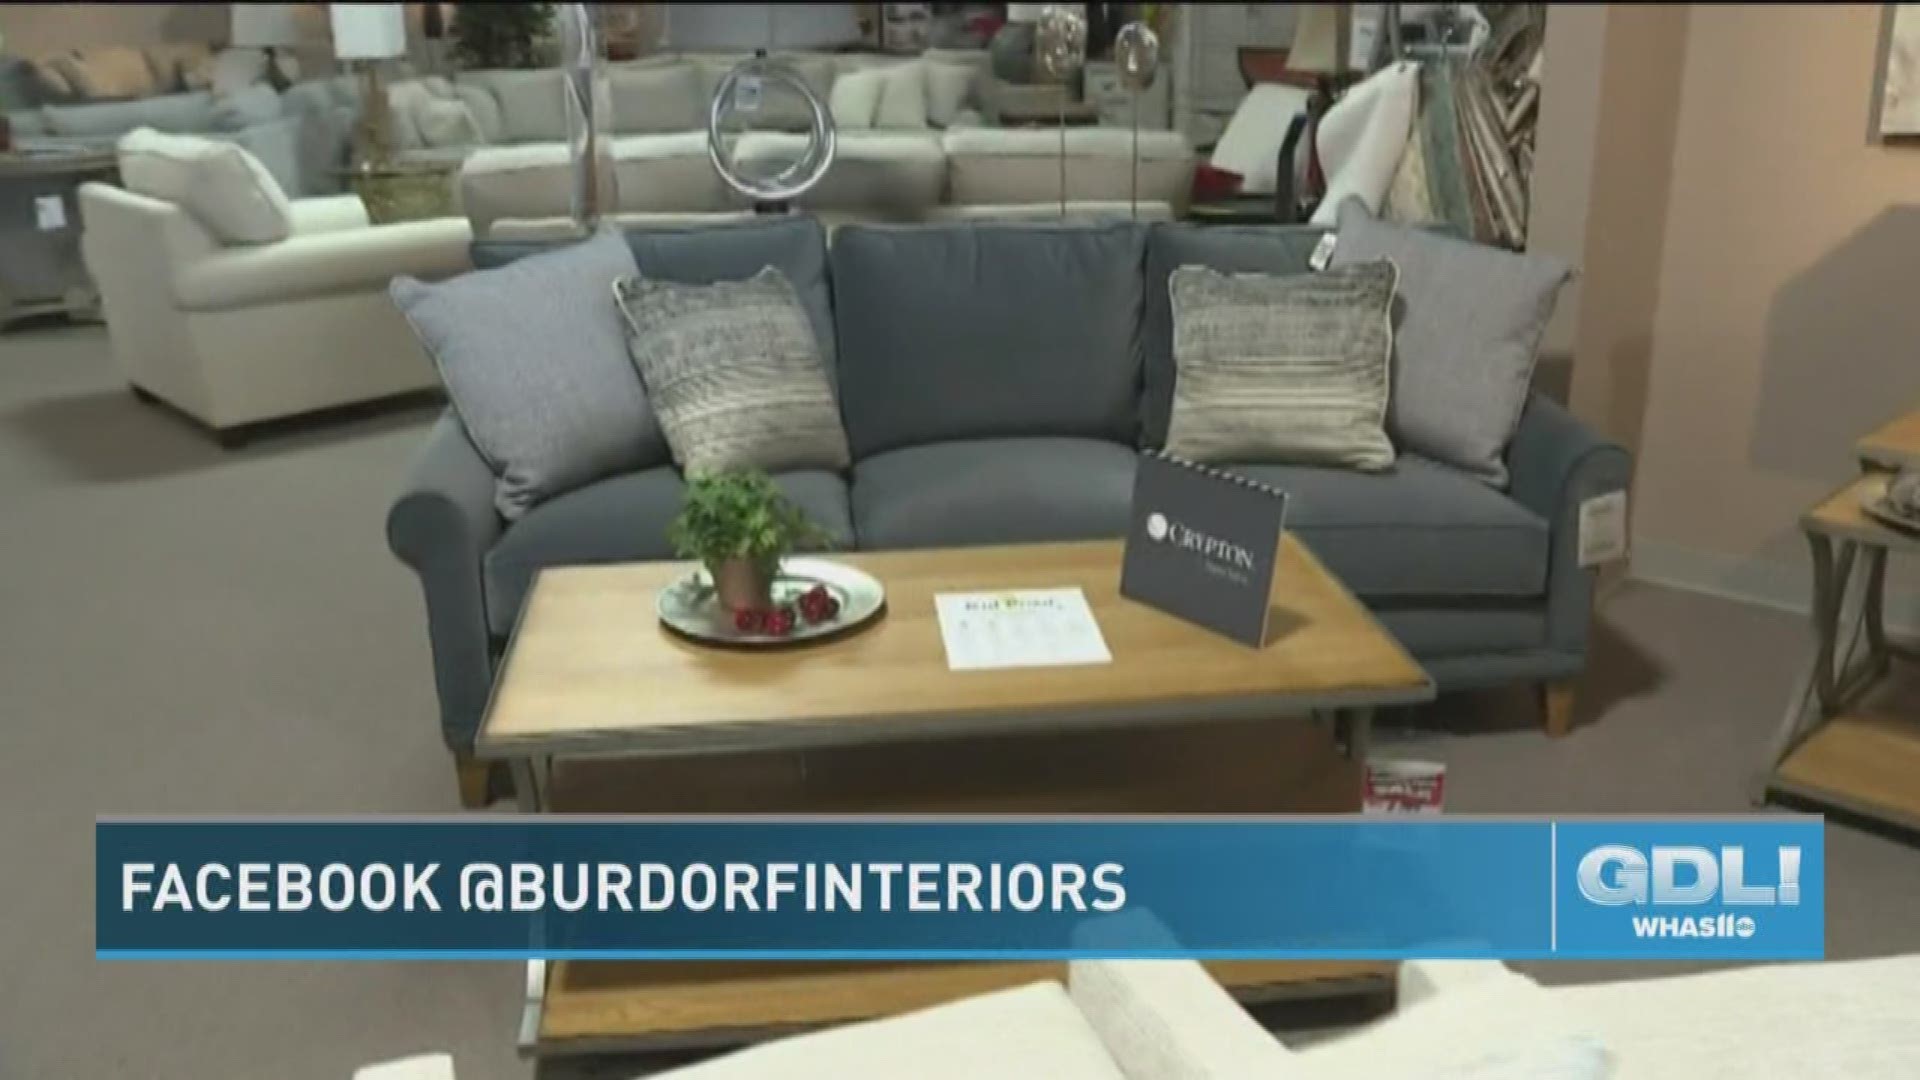 Burdorf is running a contest to win a free room makeover. To nominate a deserving person, just go to Burdorf.com or to @BurdorfInteriors on Facebook and tell them who deserves to win and why. You have until midnight on July 21, 2019 to nominate someone. Burdorf Interiors is located at 401 North English Station Road in Louisville, KY. For more information, call 502-719-9700 or go to Burdorf.com.